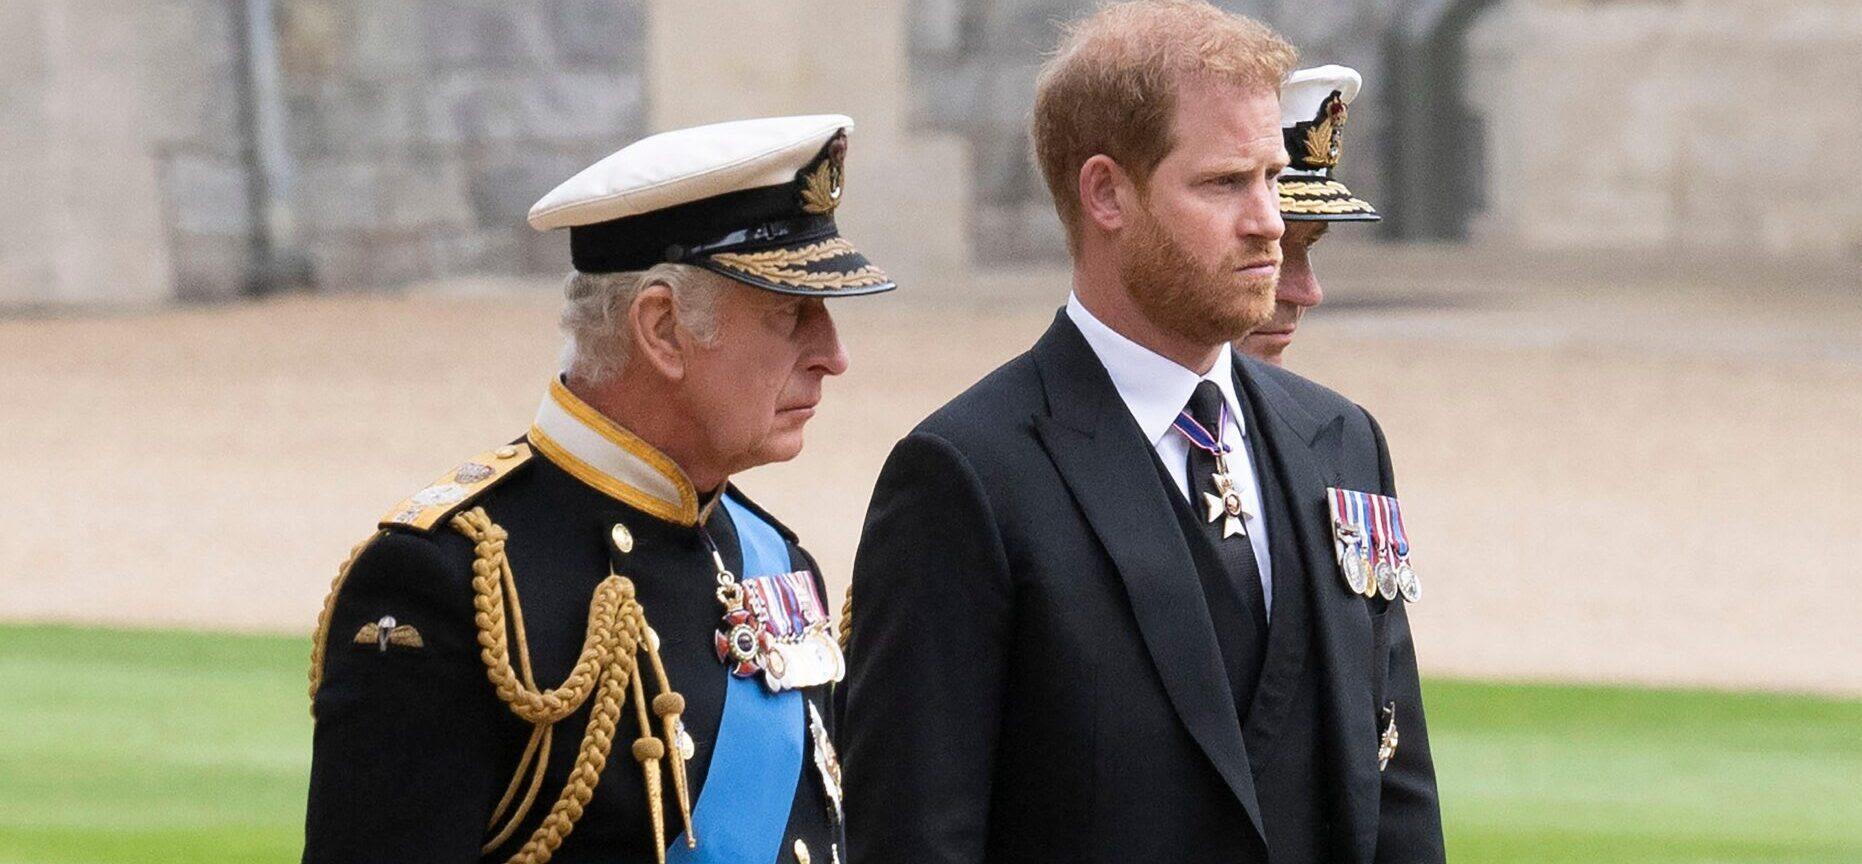 Prince Harry Likely To Release New Memoir After King Charles' Death, Royal Expert Says